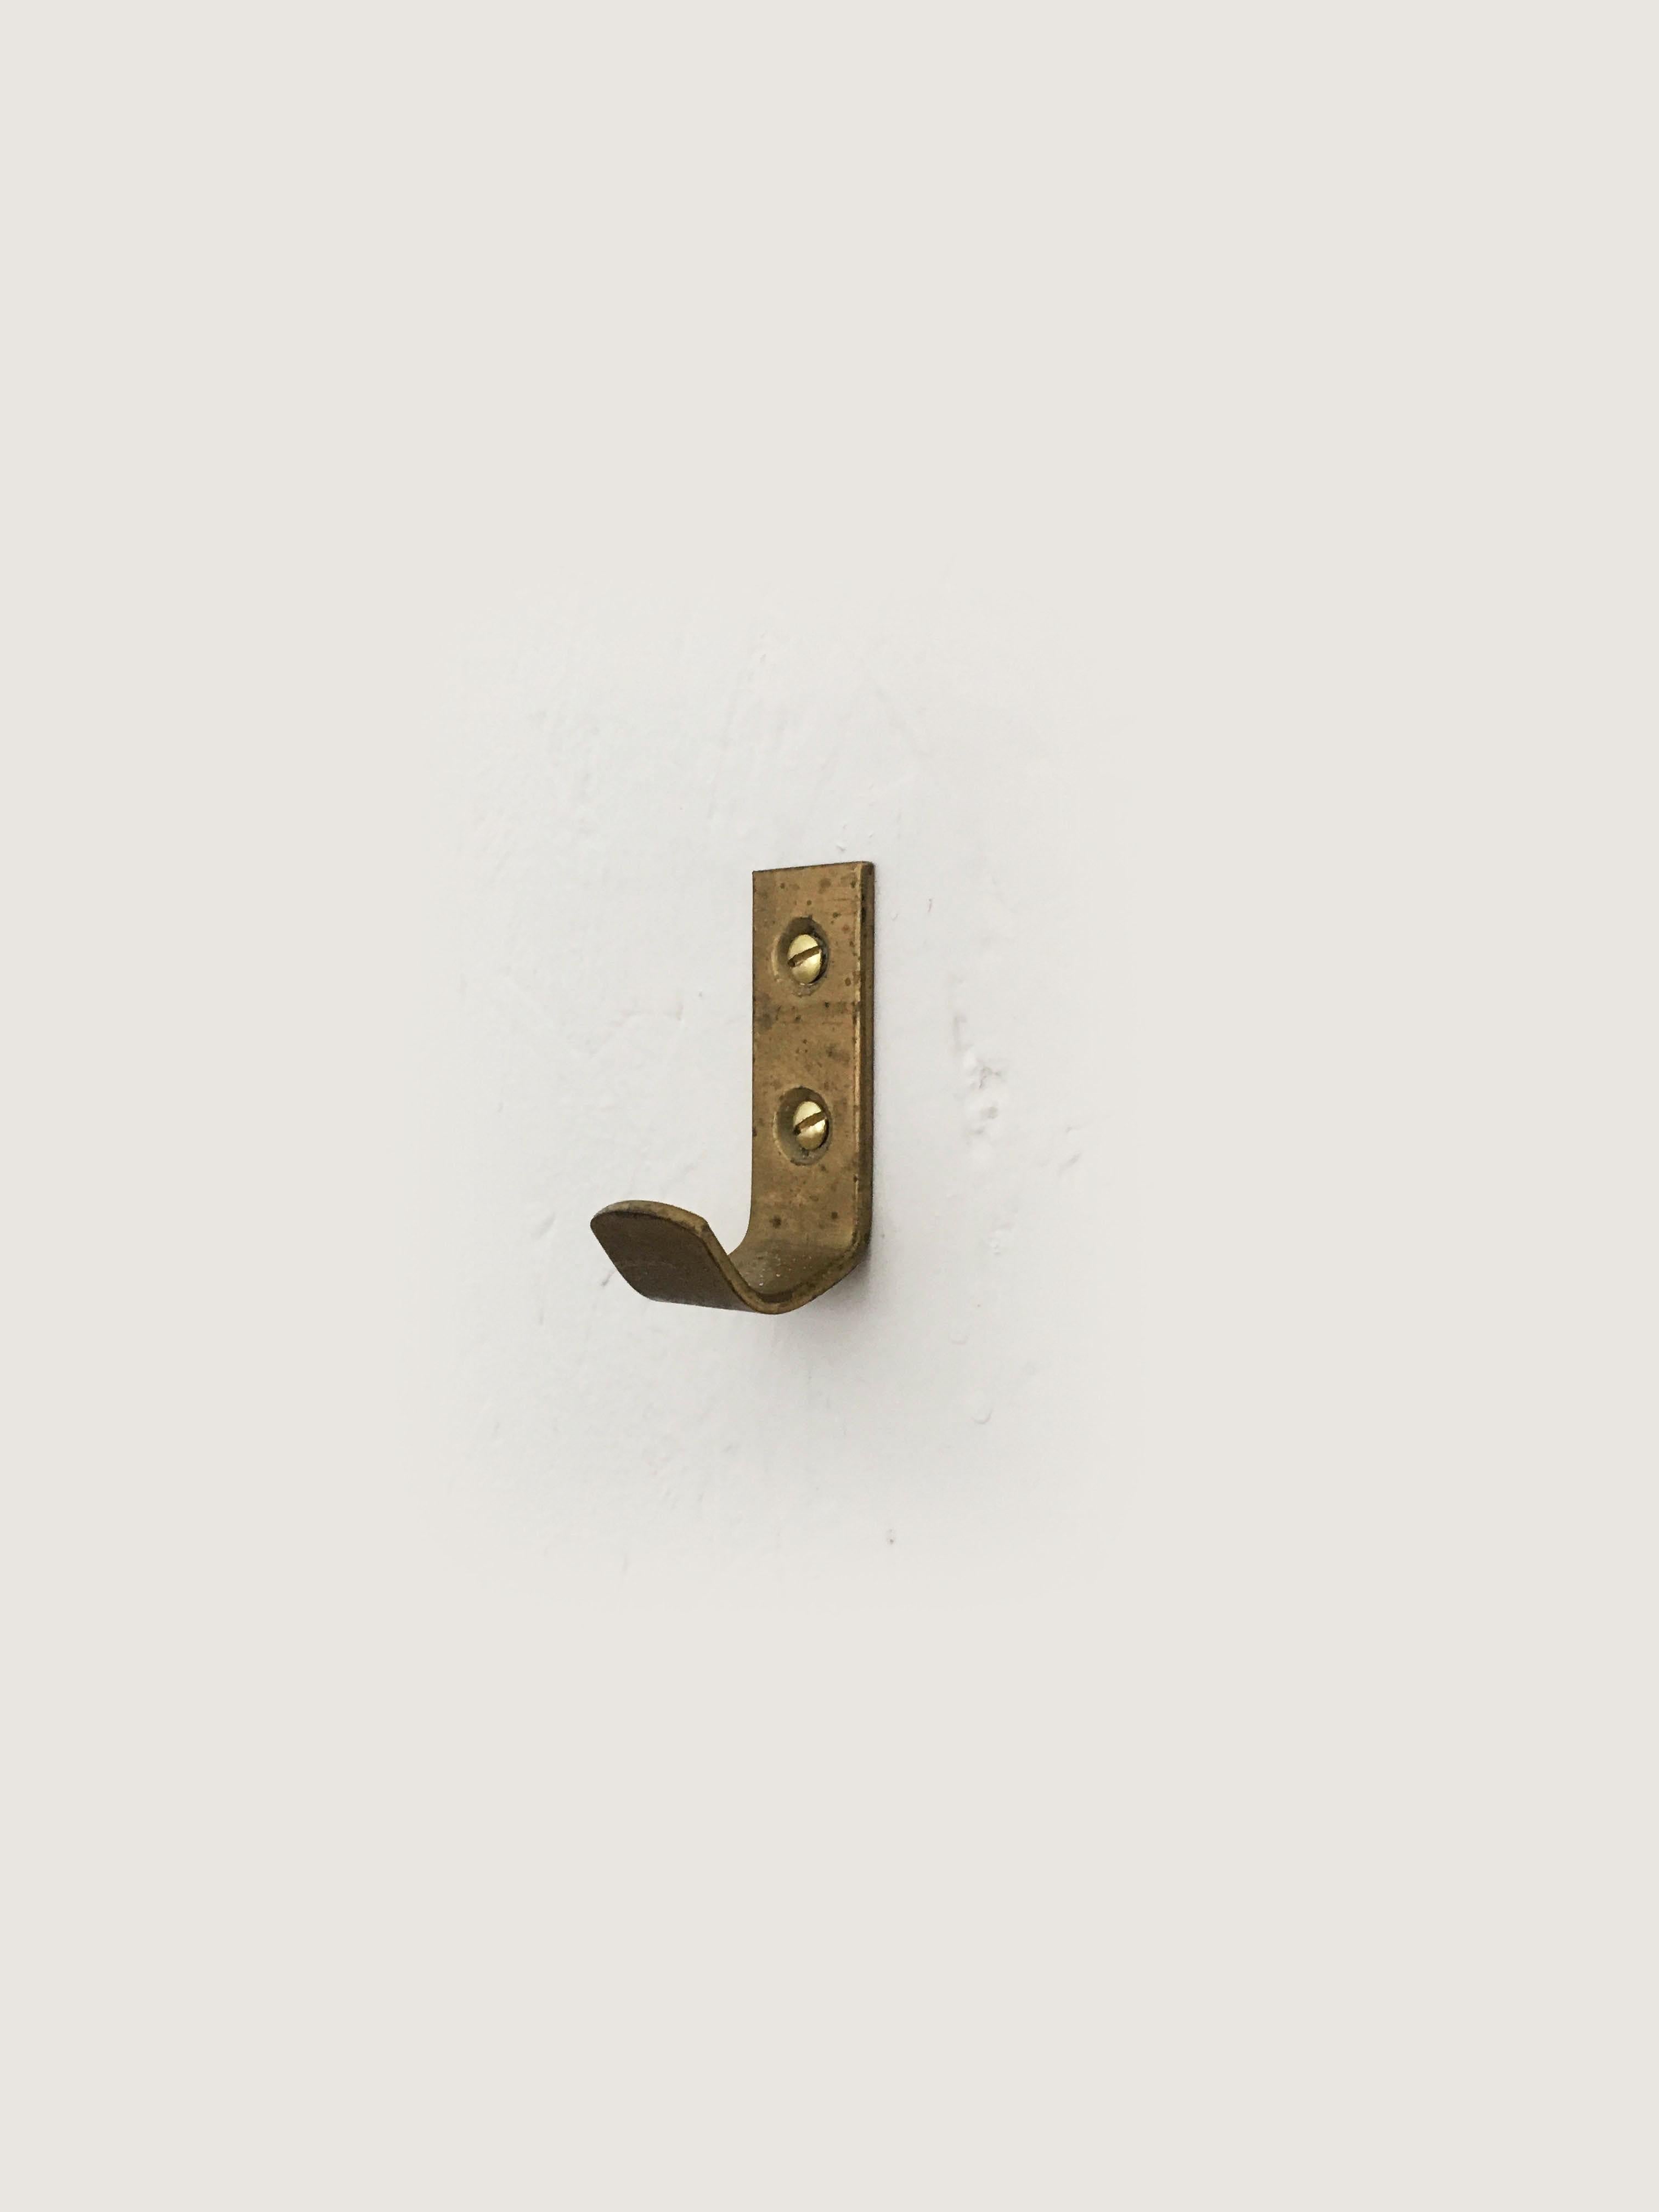 A set of 10 petite minimalist Austrian brass wall hooks, made of solid brass, executed in the 1950s by Hertha Baller, Austria. The size is perfectly suited for a bath or bedroom. In good condition, with gently worn patina. Priced as a set of 10